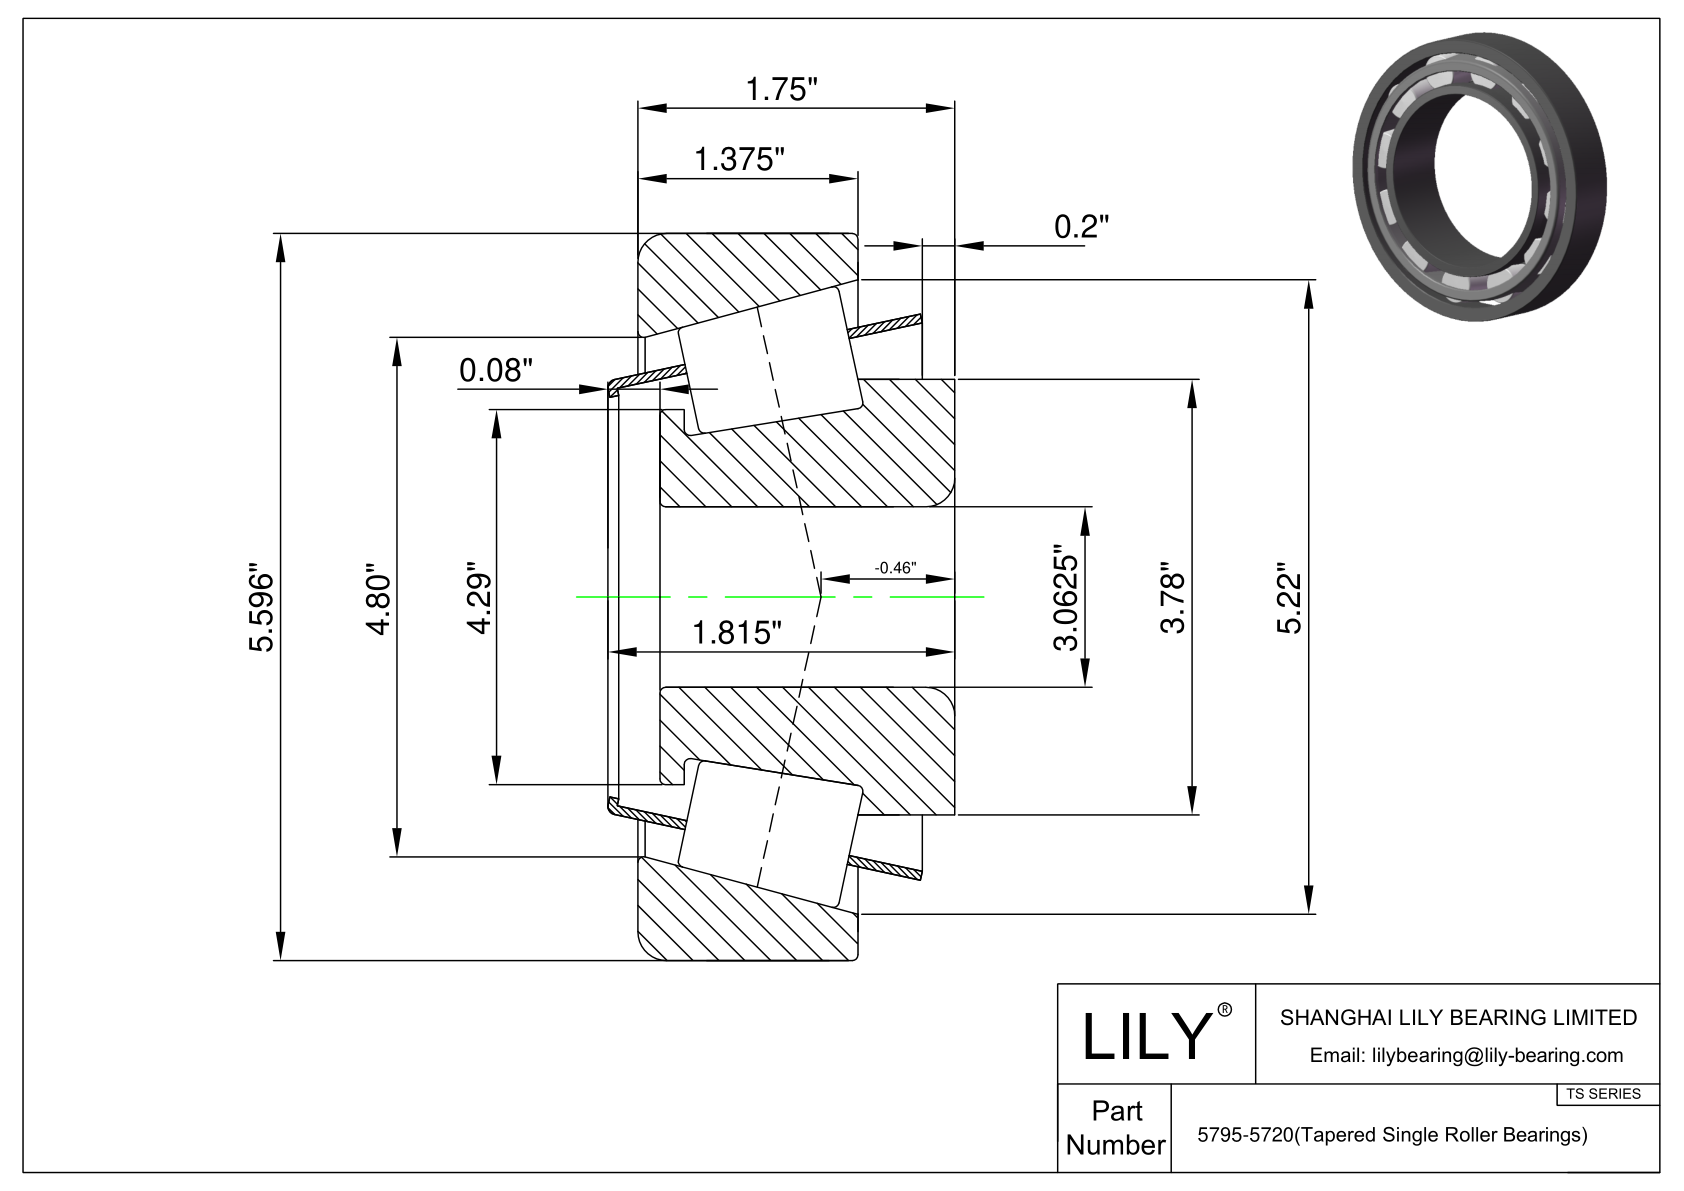 5795-5720 TS (Tapered Single Roller Bearings) (Imperial) cad drawing